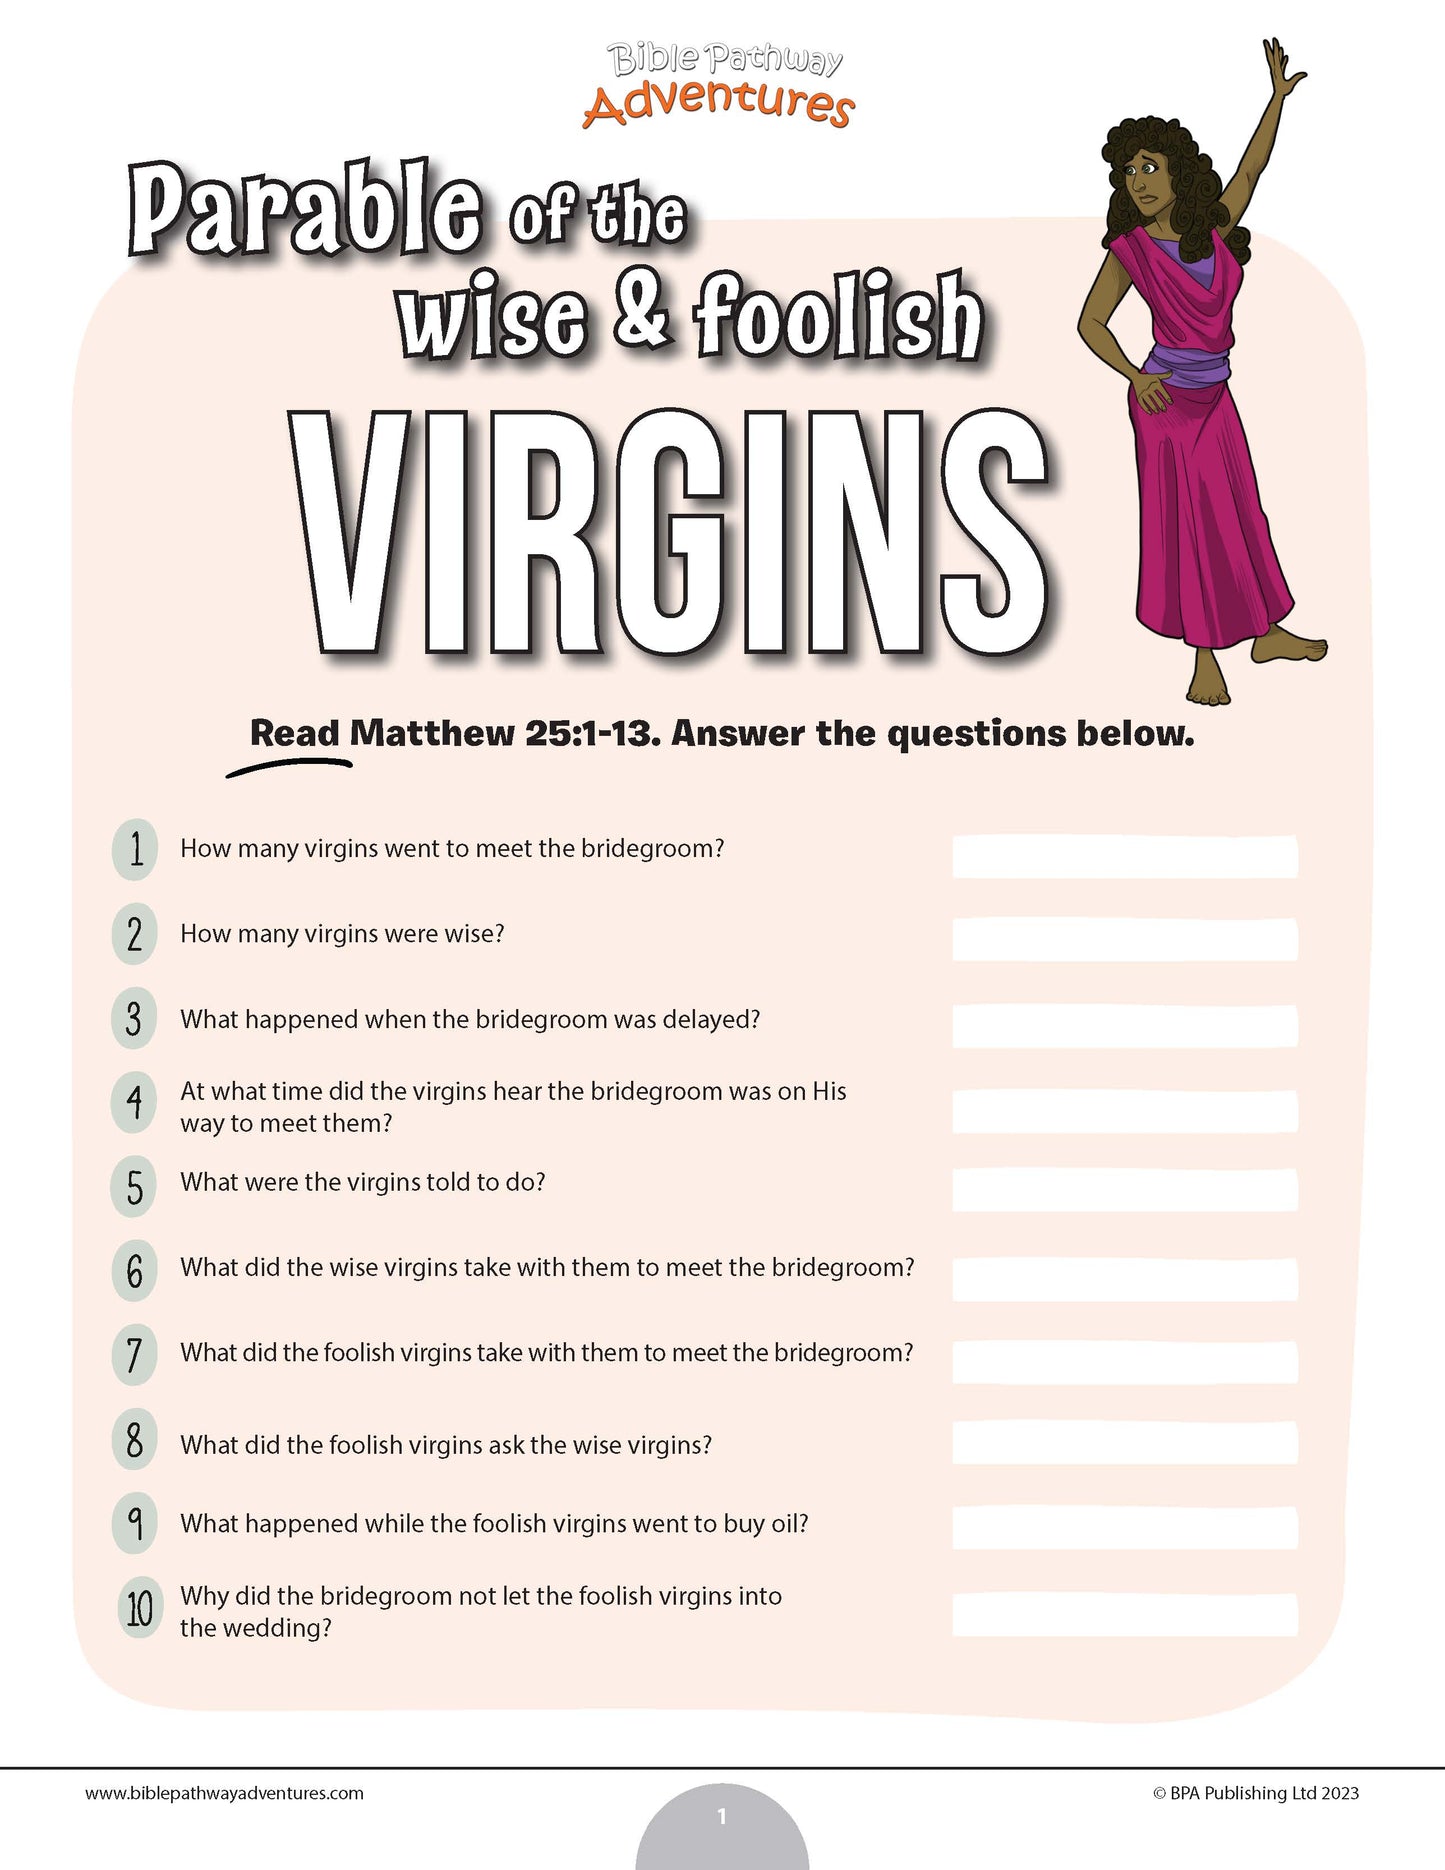 Parable of the wise and foolish virgins quiz